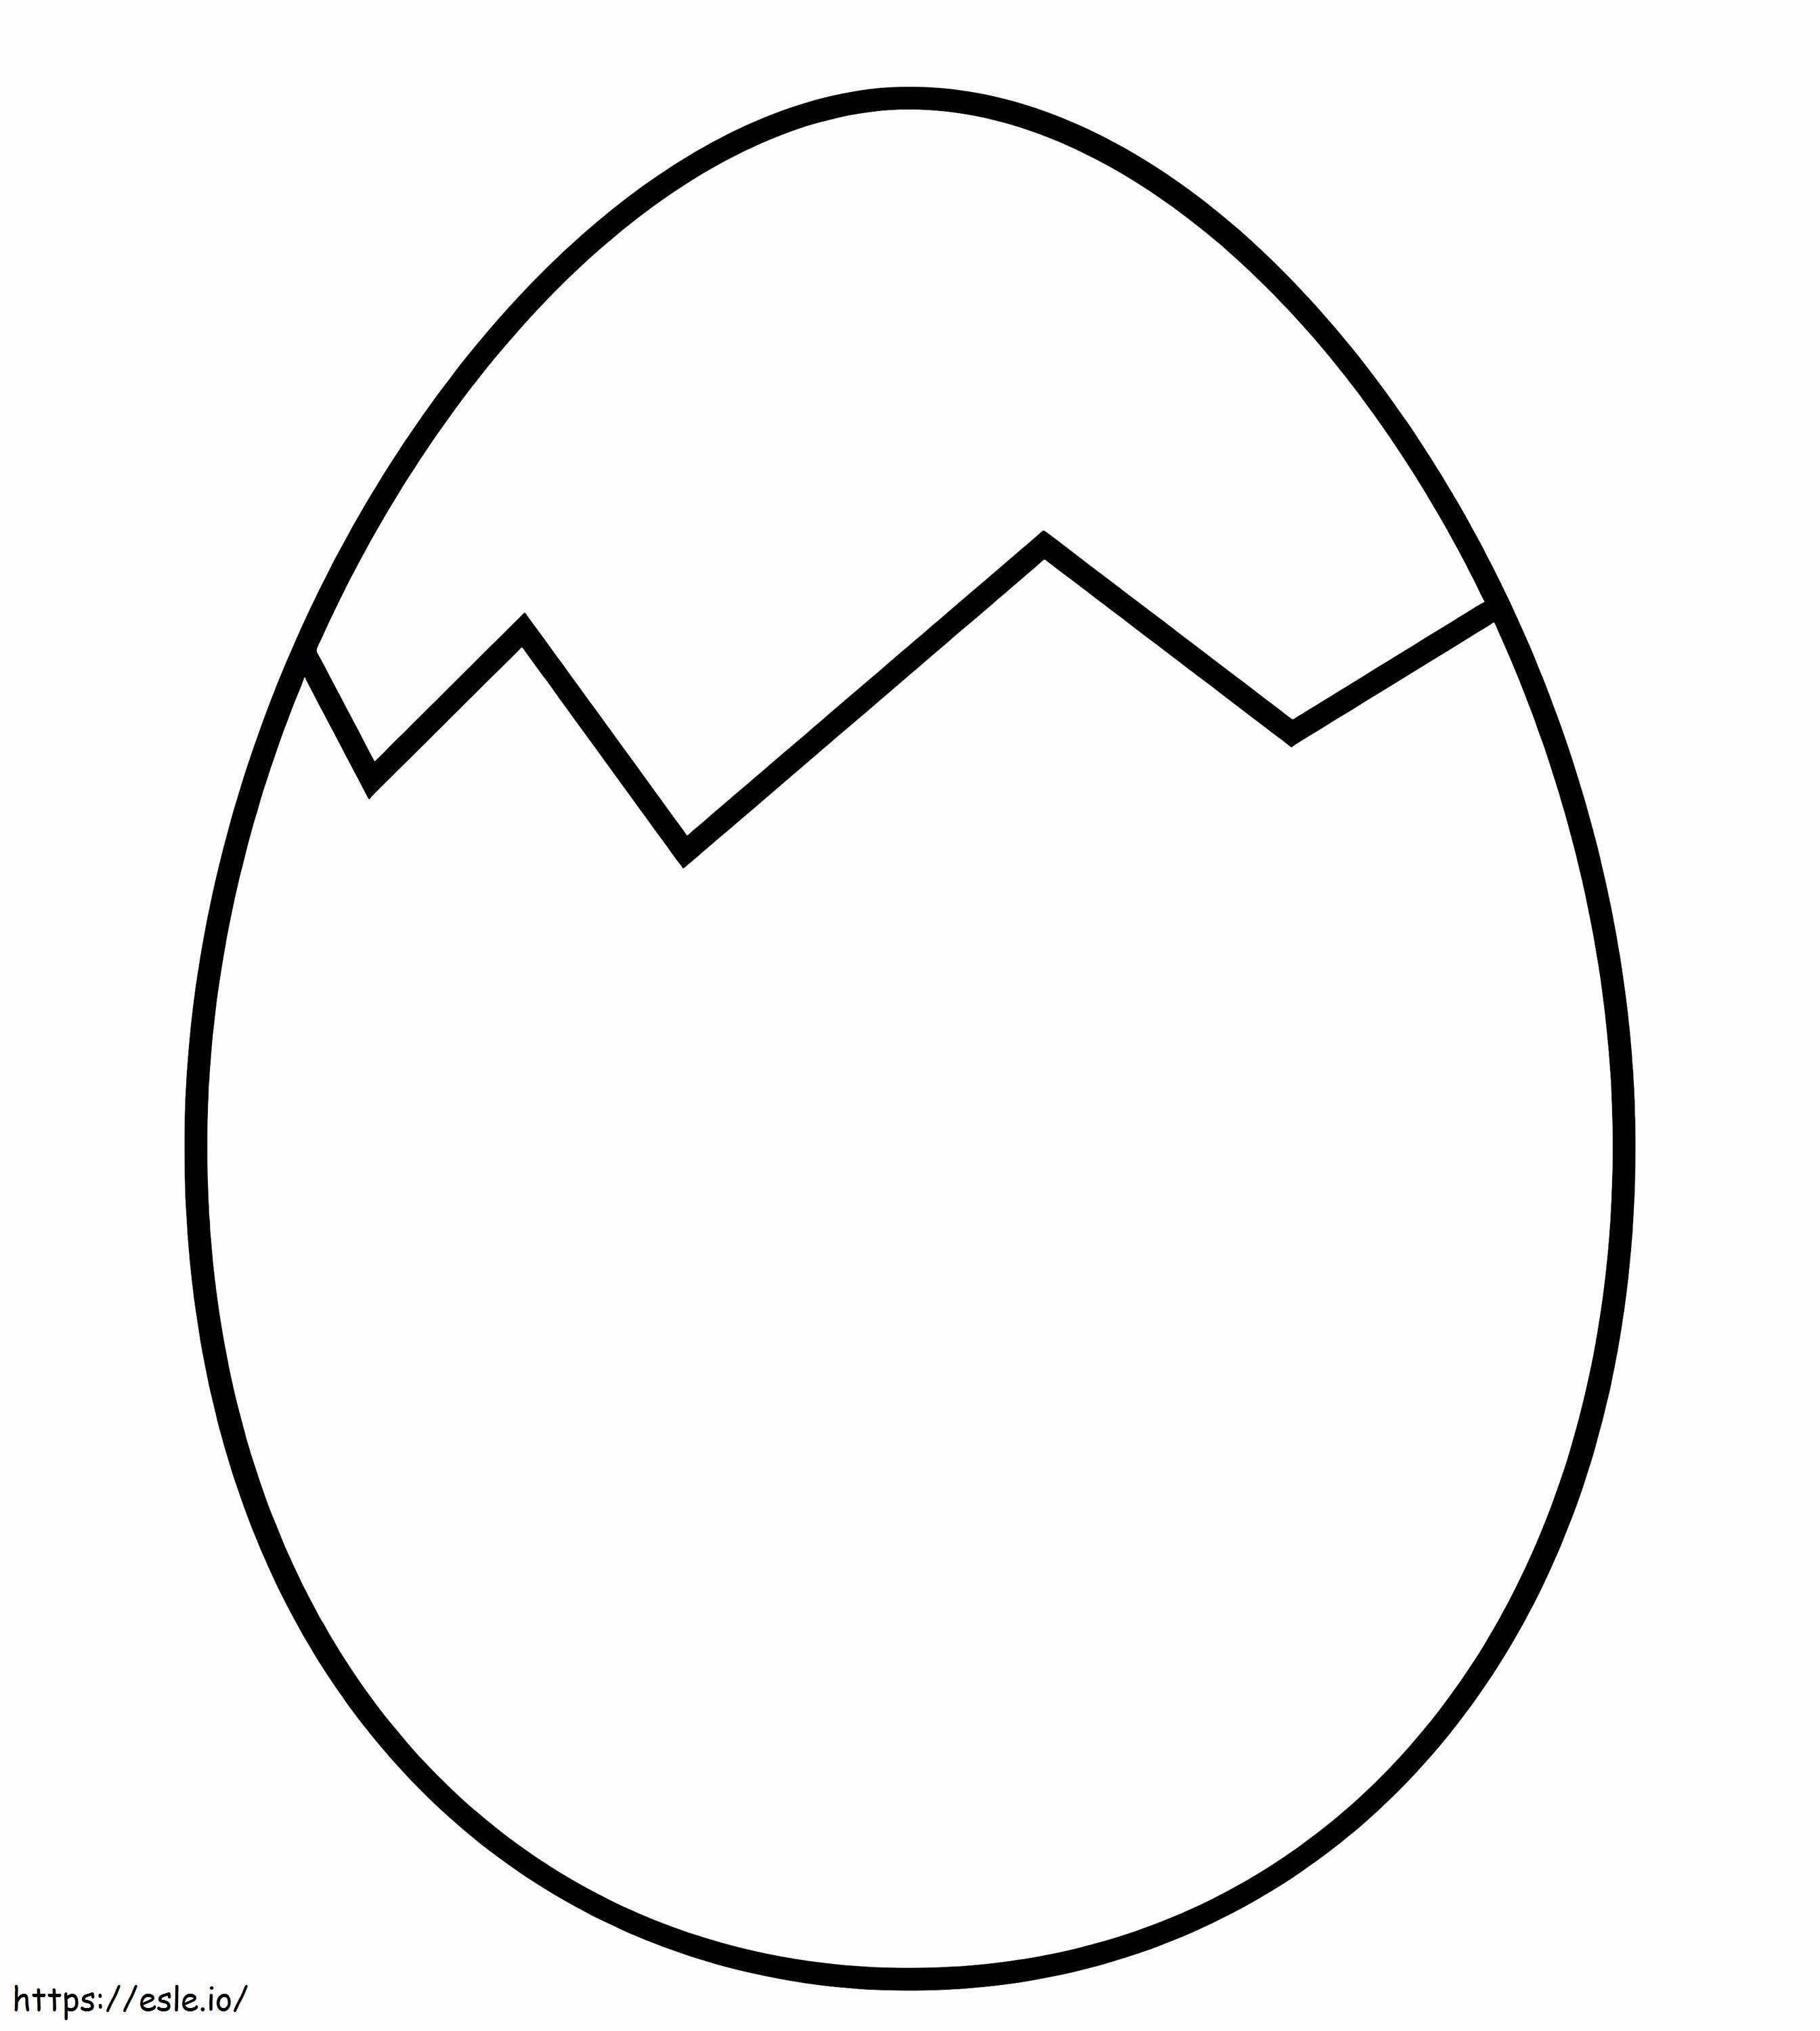 Cracked Egg coloring page